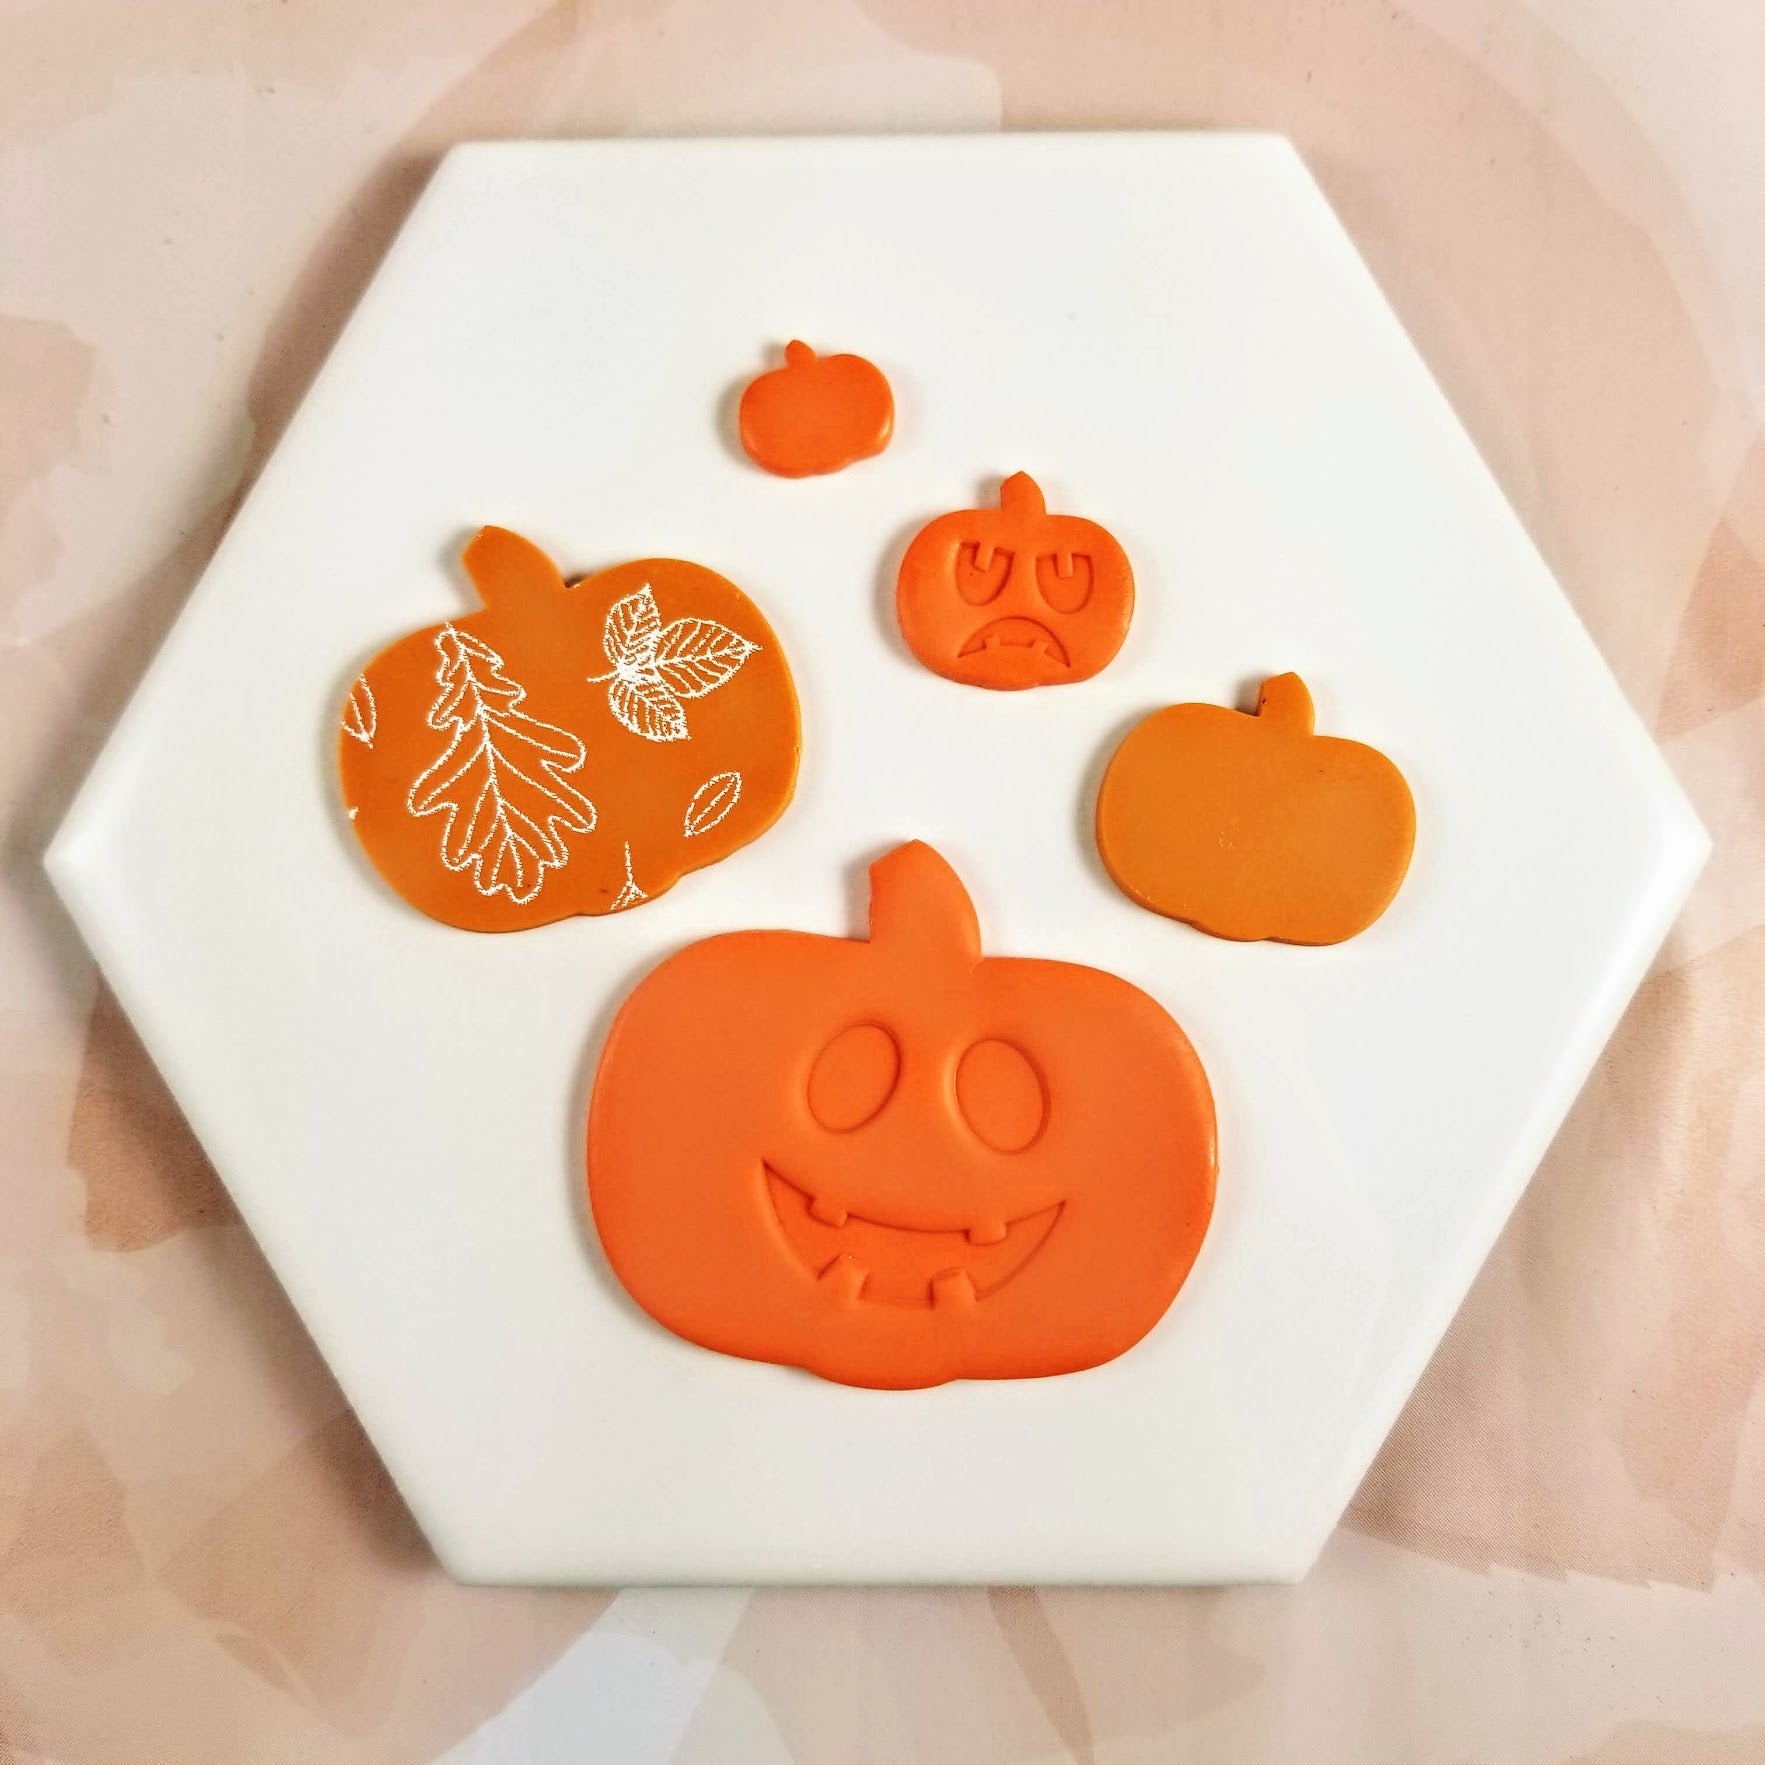 pumpkin shape on polymer clay with jack o lantern faces design and fall leaves silk screen pattern